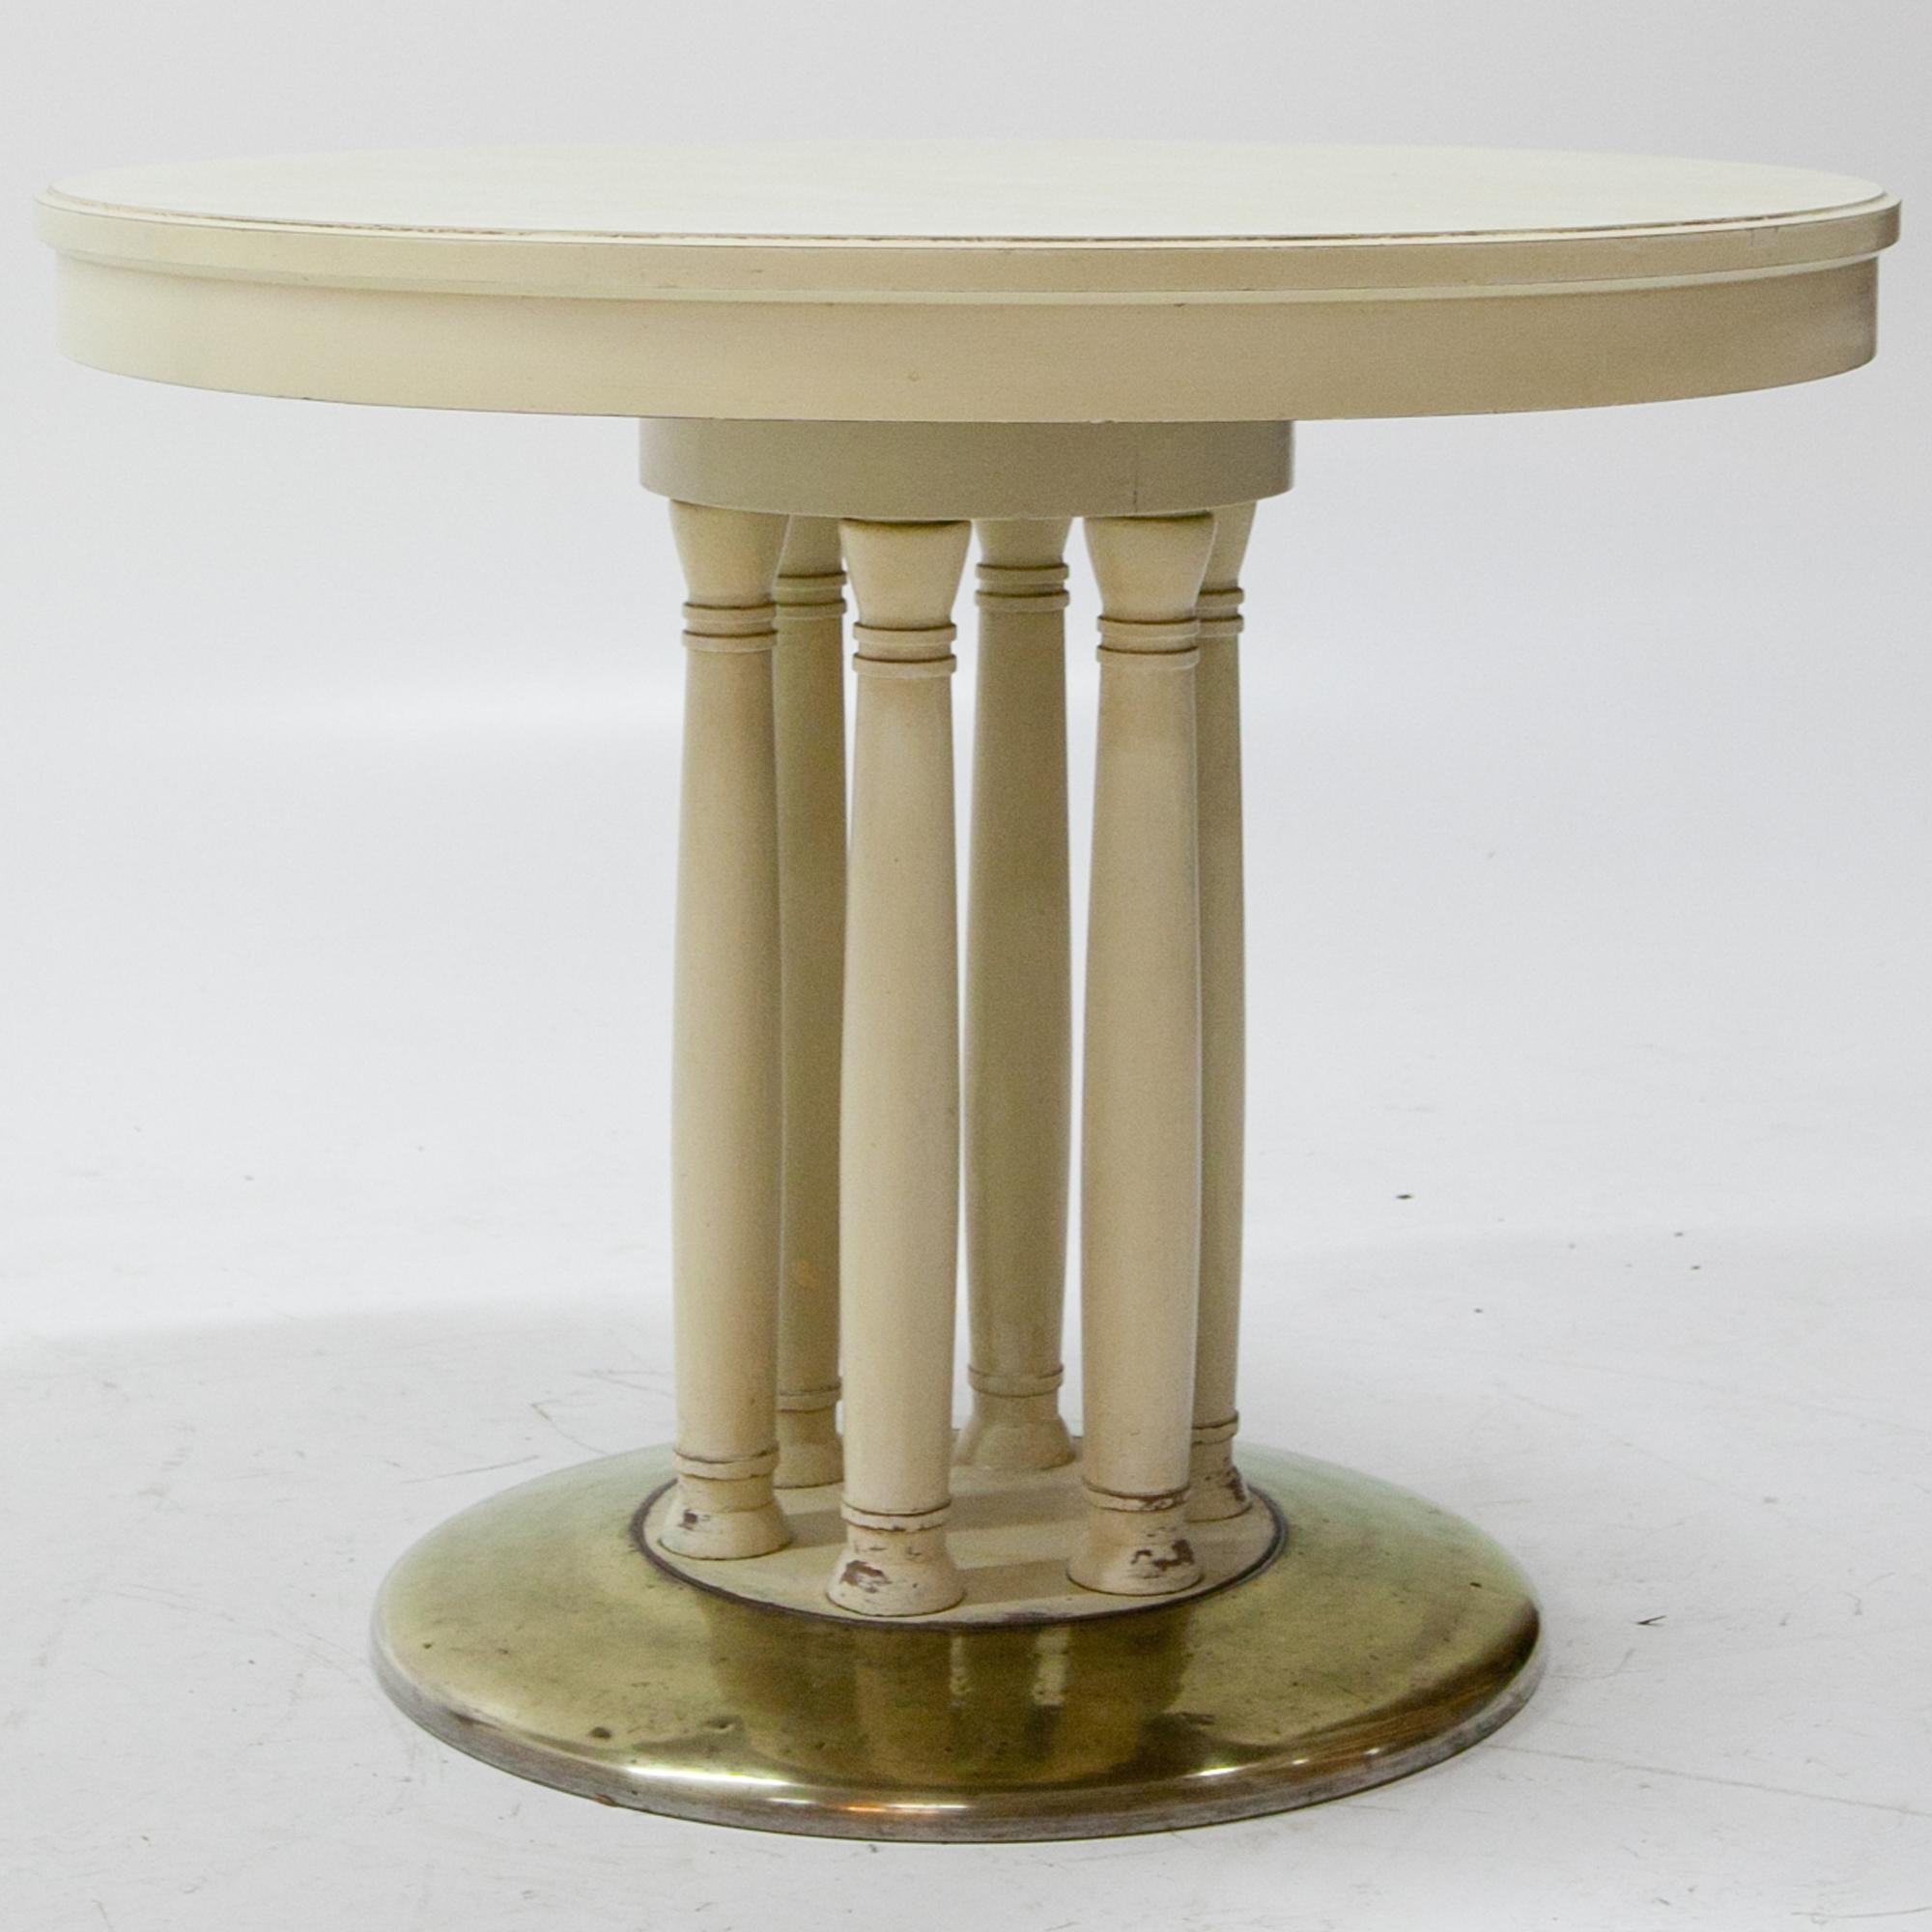 Round crème-white salon table of the Viennese Secession, standing on a round brass foot. Six columns support the tabletop. The table shows signs of age and use.